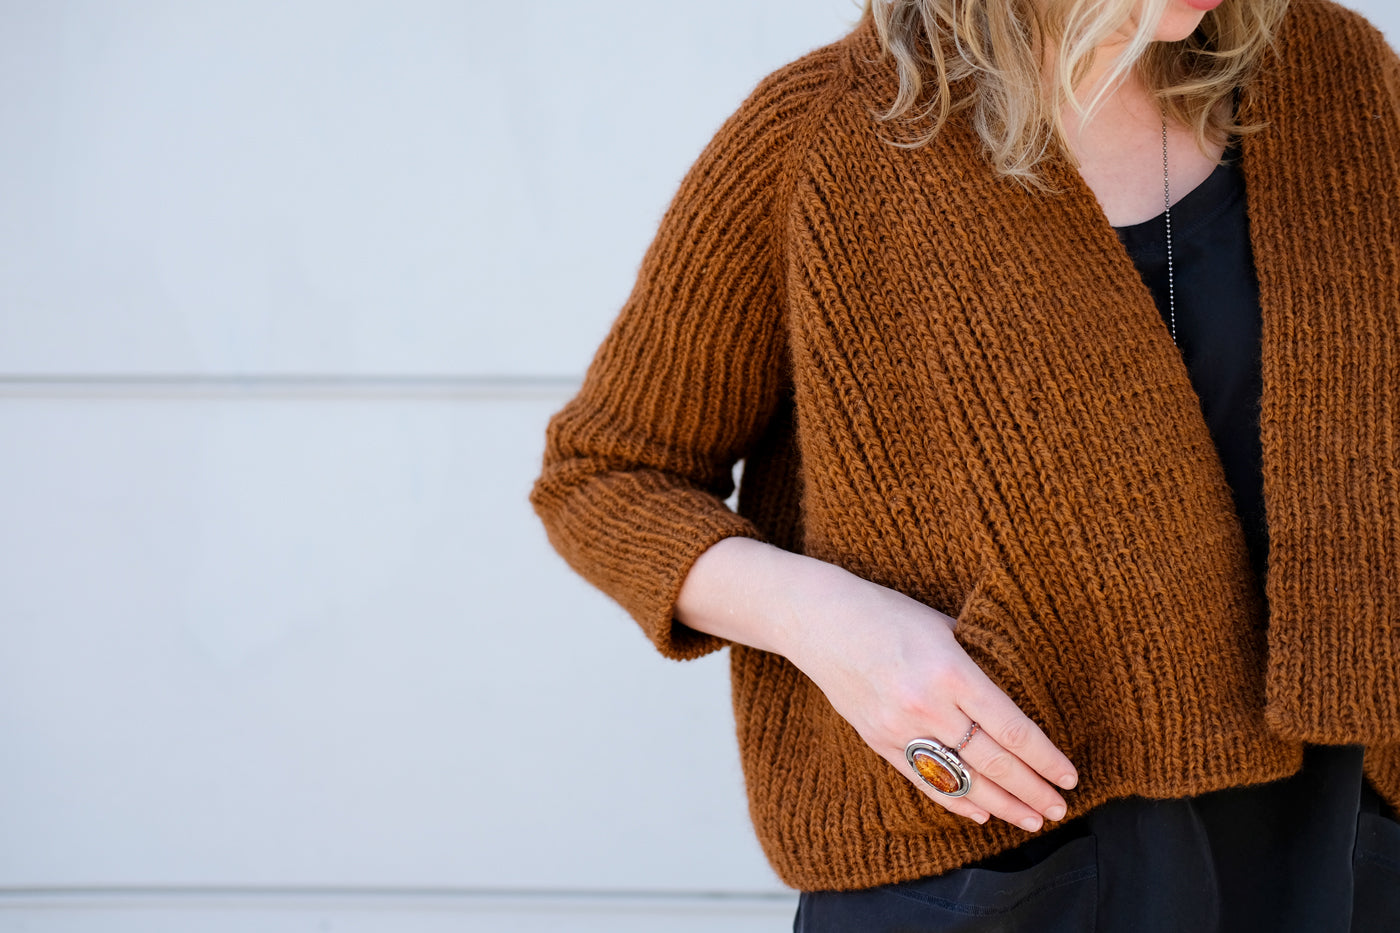 Tiny pocket detail for Amber's cropped sweater